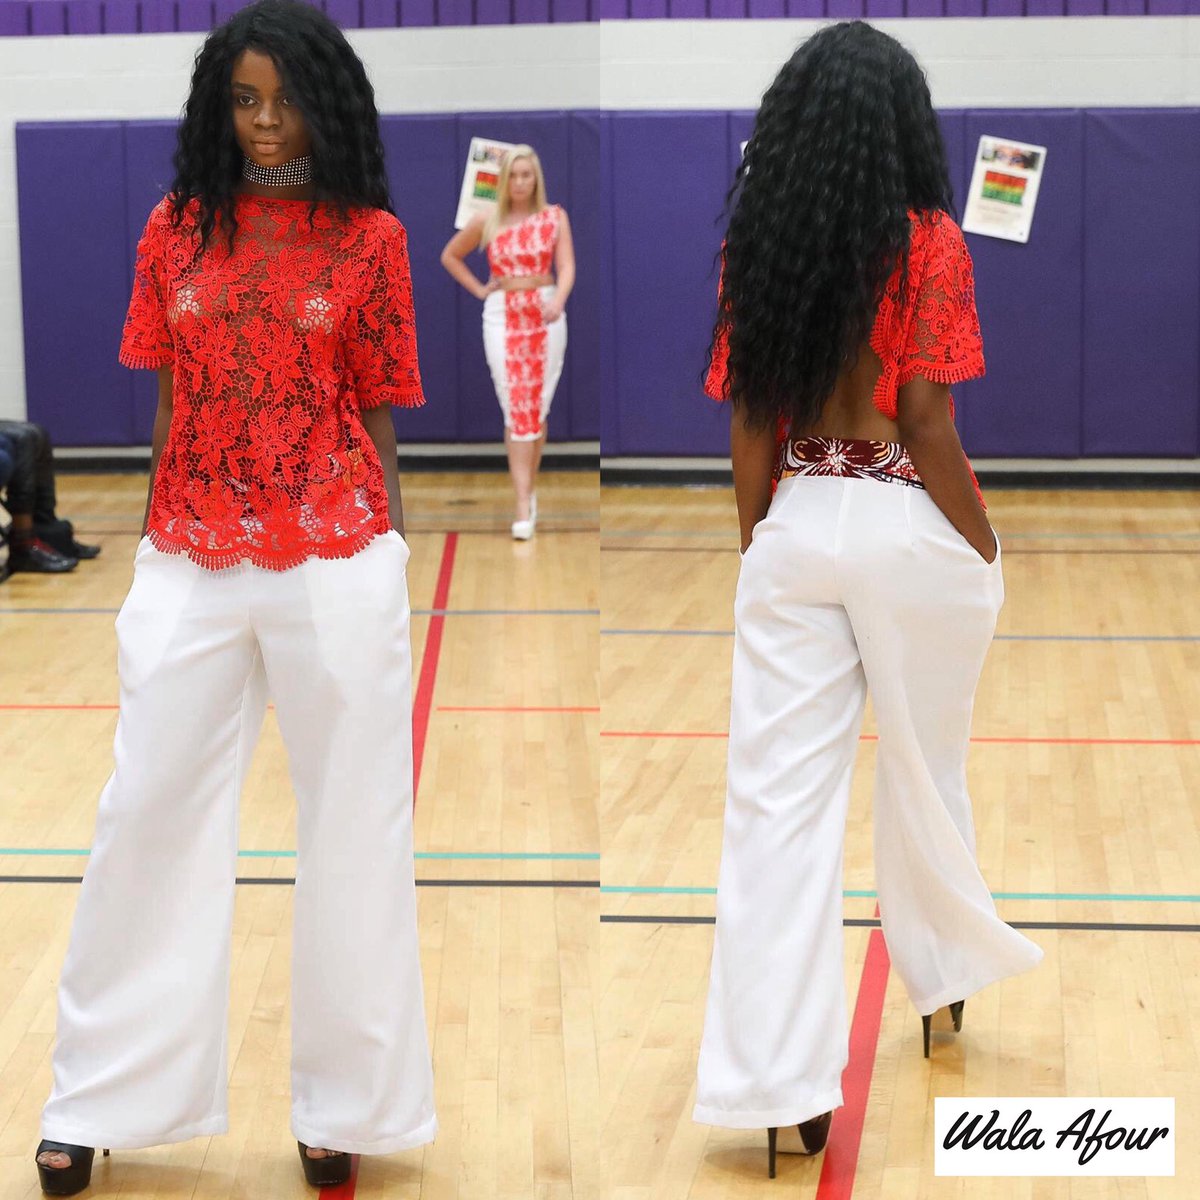 Collection: An African Daydream. Send a message to own this look.  Made to your measurements.

#walaafour #lacetop #laceblouse #bareback #backlessblouse #redblouse #palazzopants #whitepants #whitetrousers #widelegpants #widelegtrousers #onlineshopping #onlineboutique #shoponline